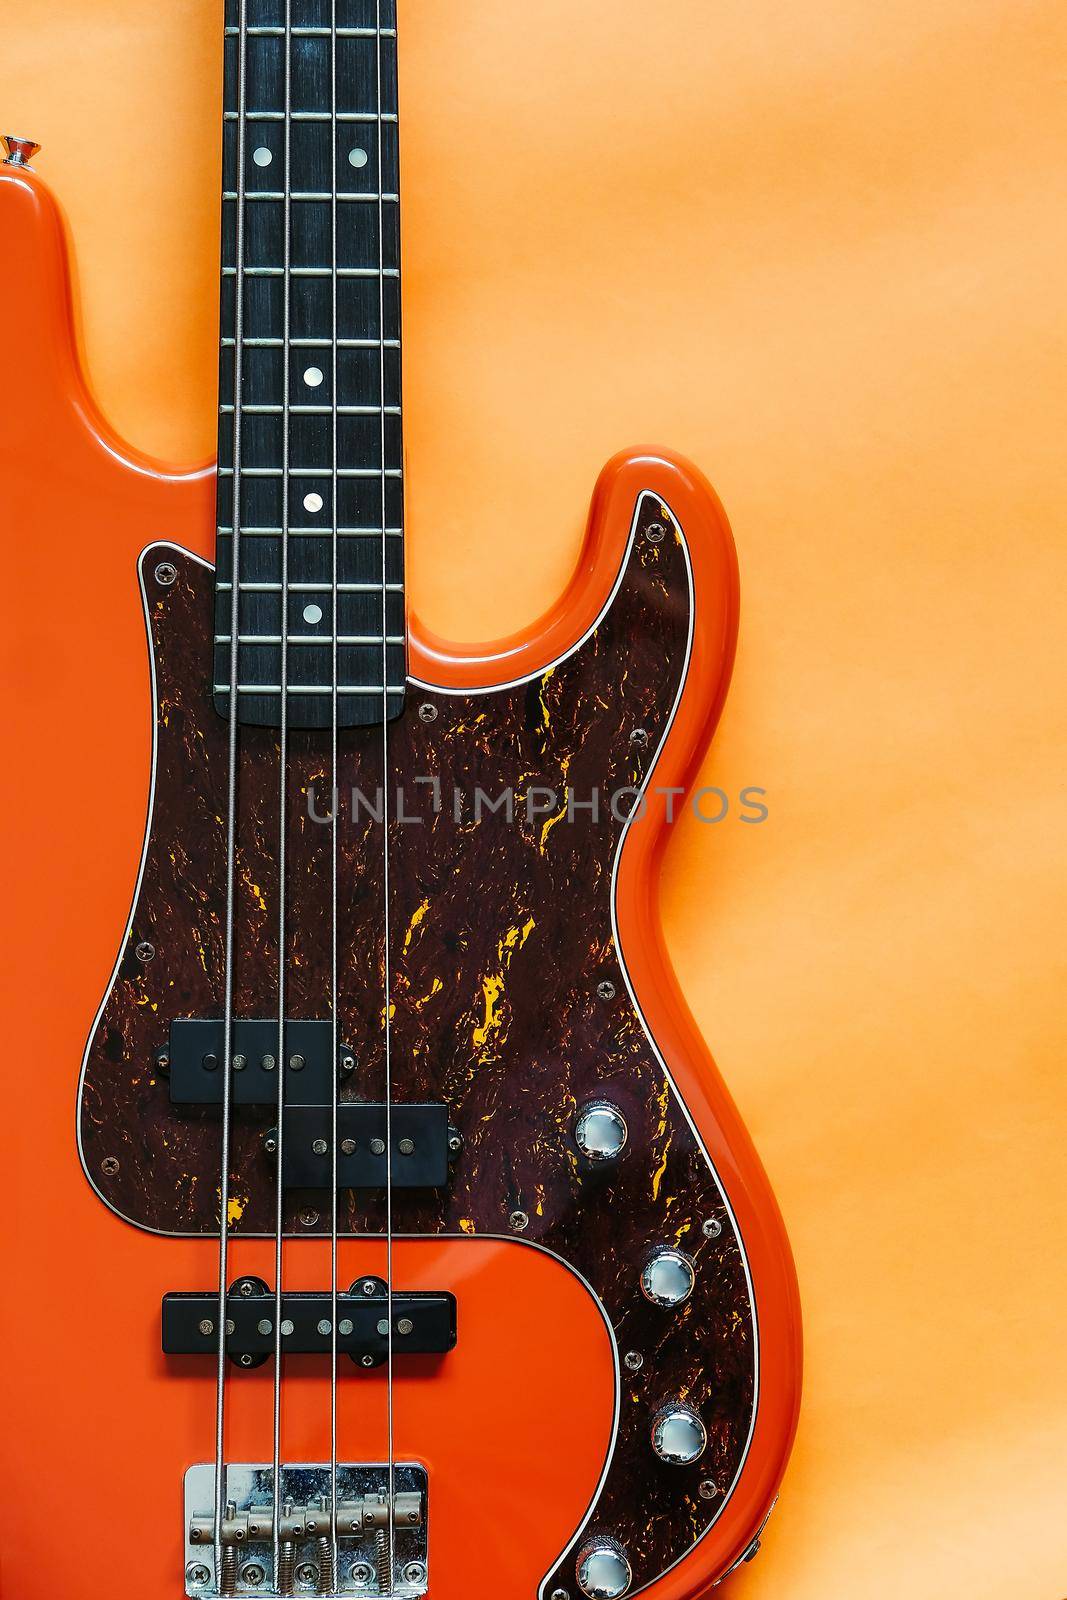 orange electric bass guitar on orange background with copy space